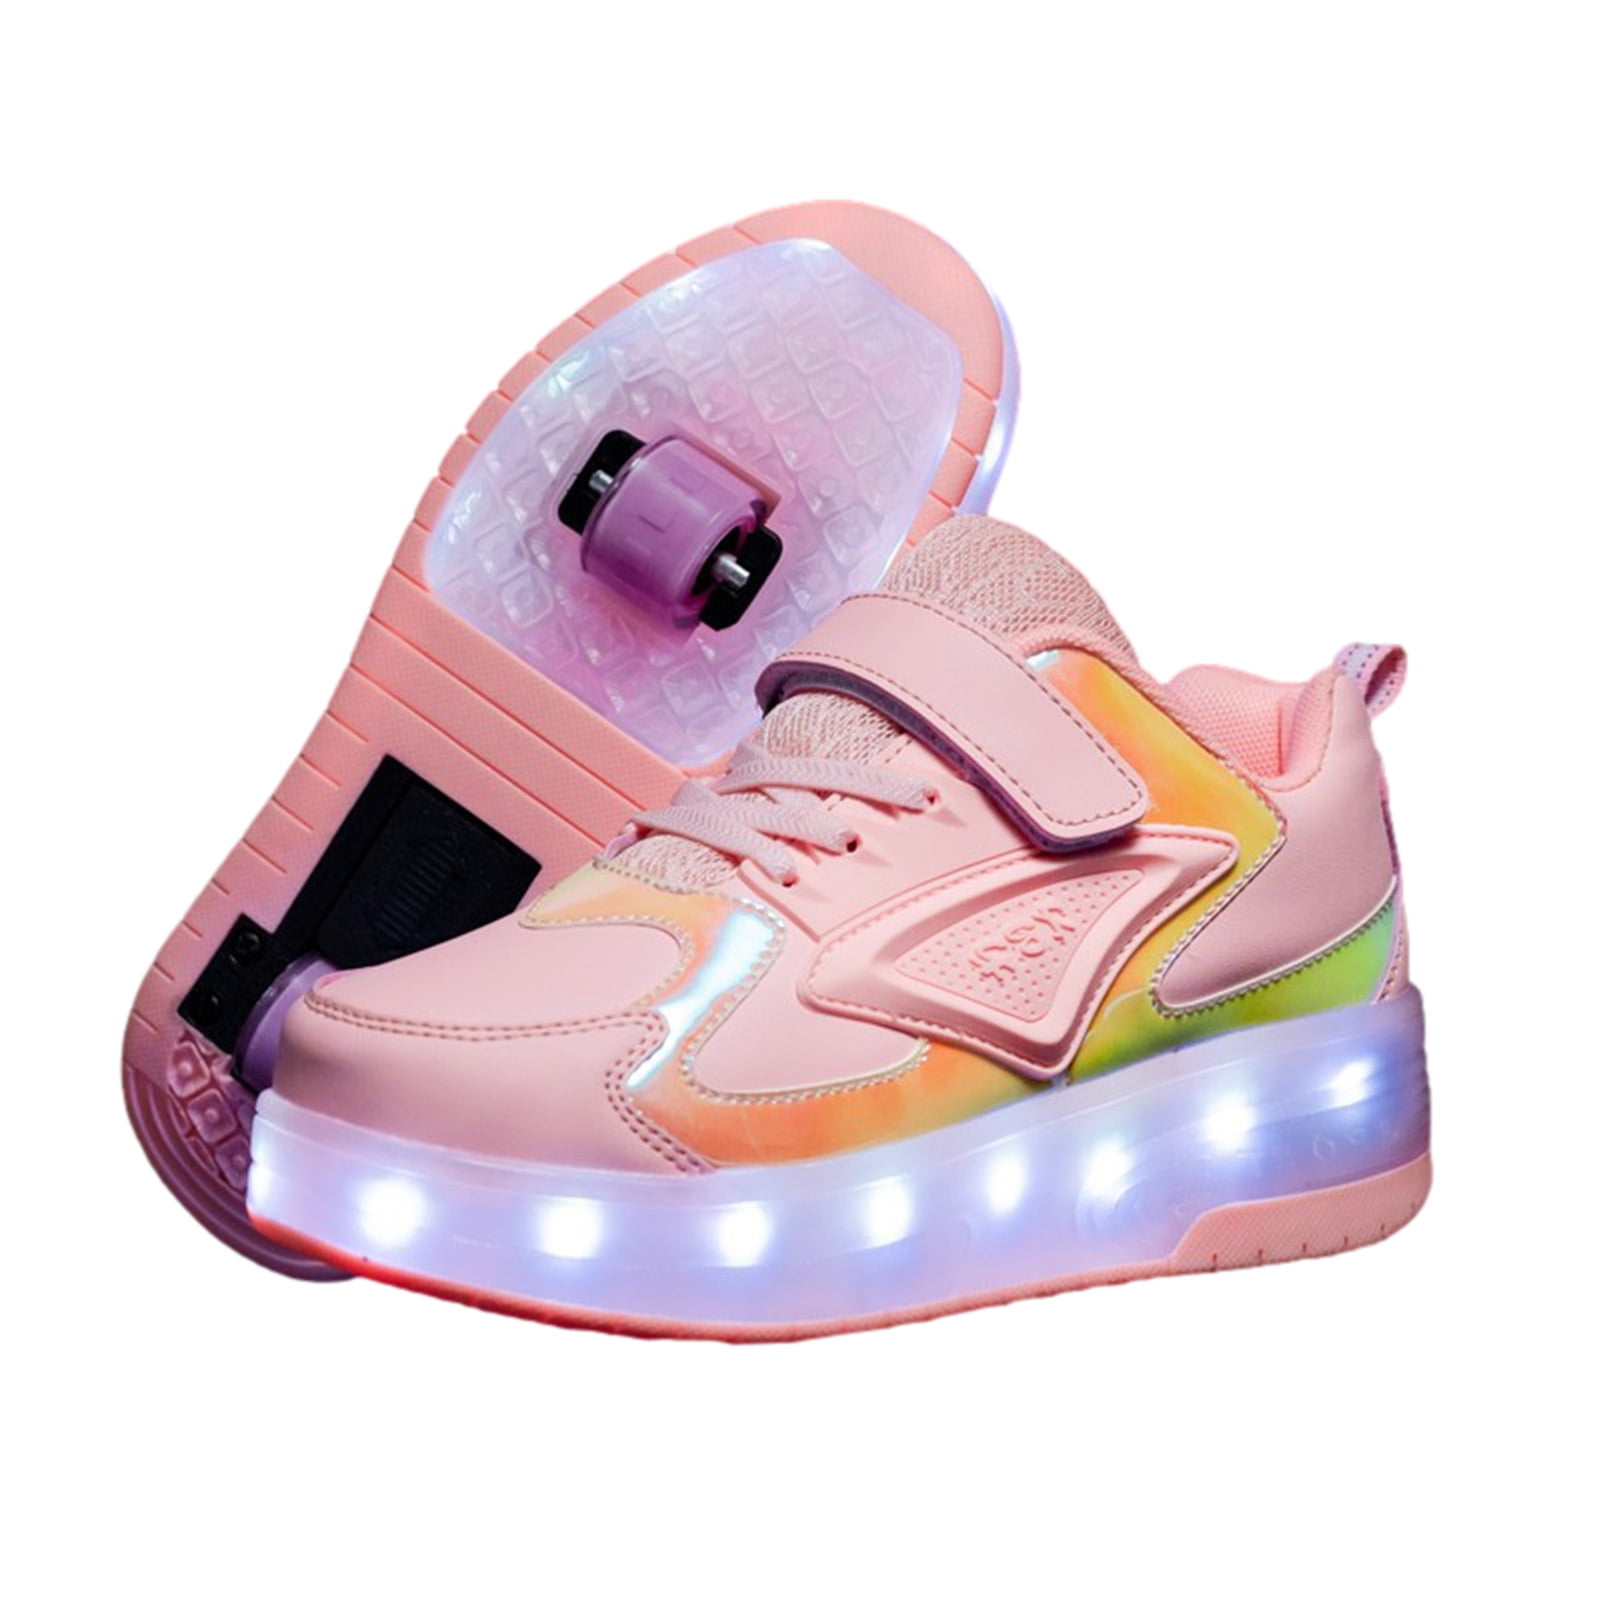 FG21ds21g Cool Xmas Gift Kids LED Light Up Roller Shoes Wheels Skate Flashing Sneakers